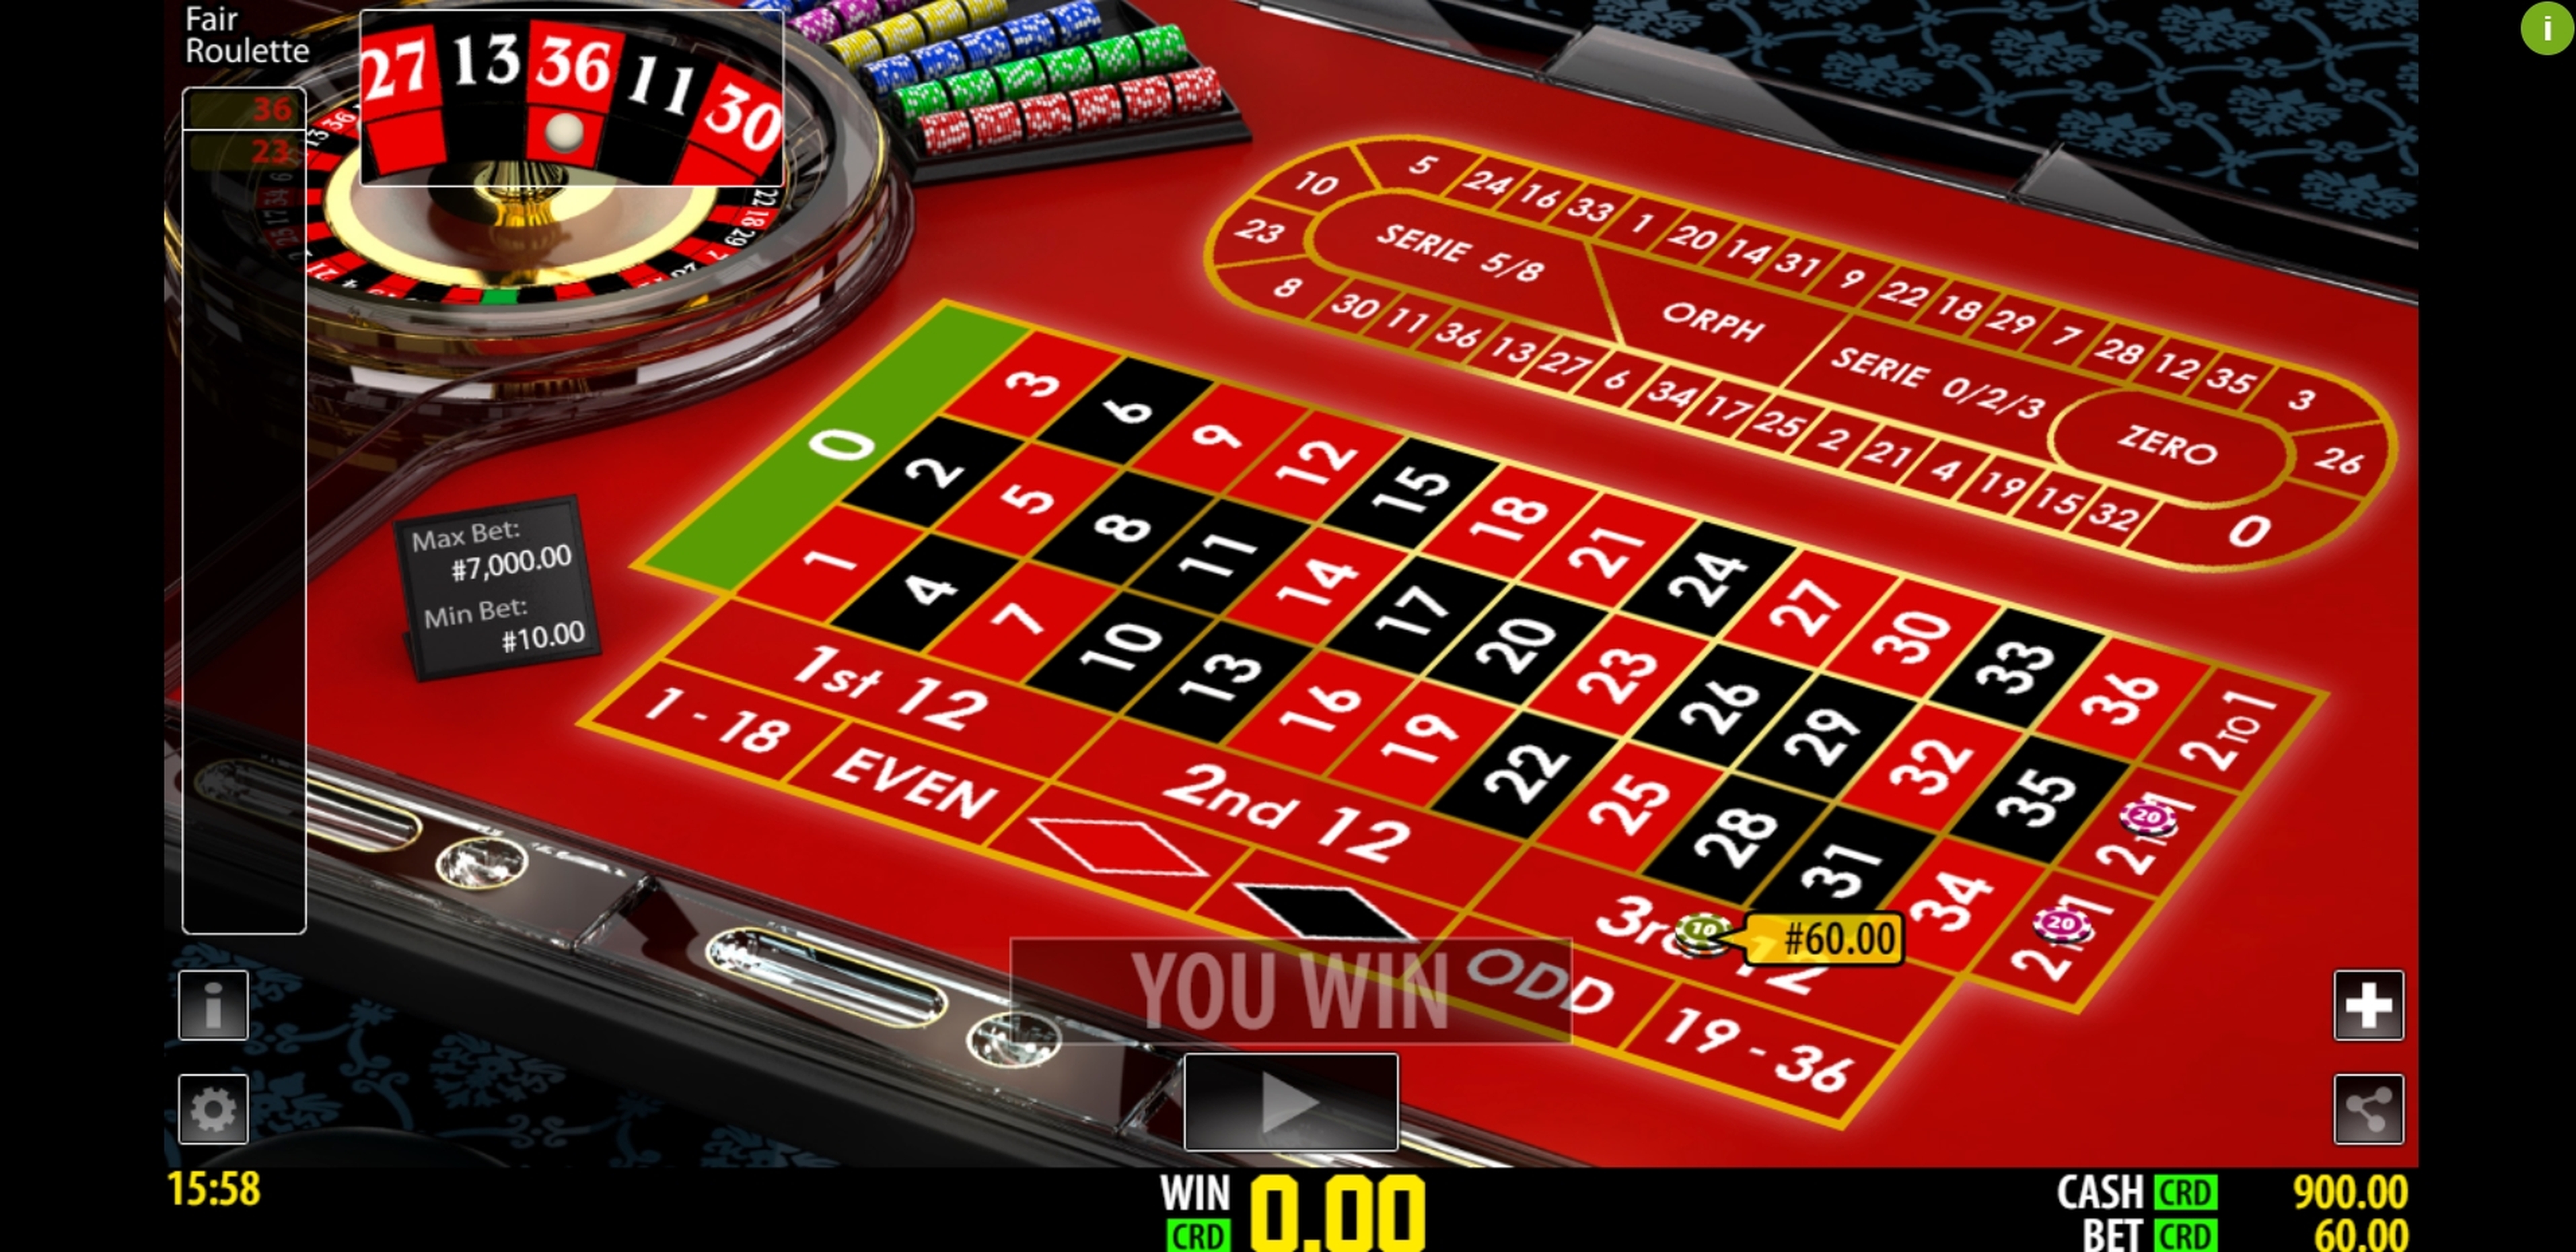 Win Money in Fair Roulette Privee Free Slot Game by World Match